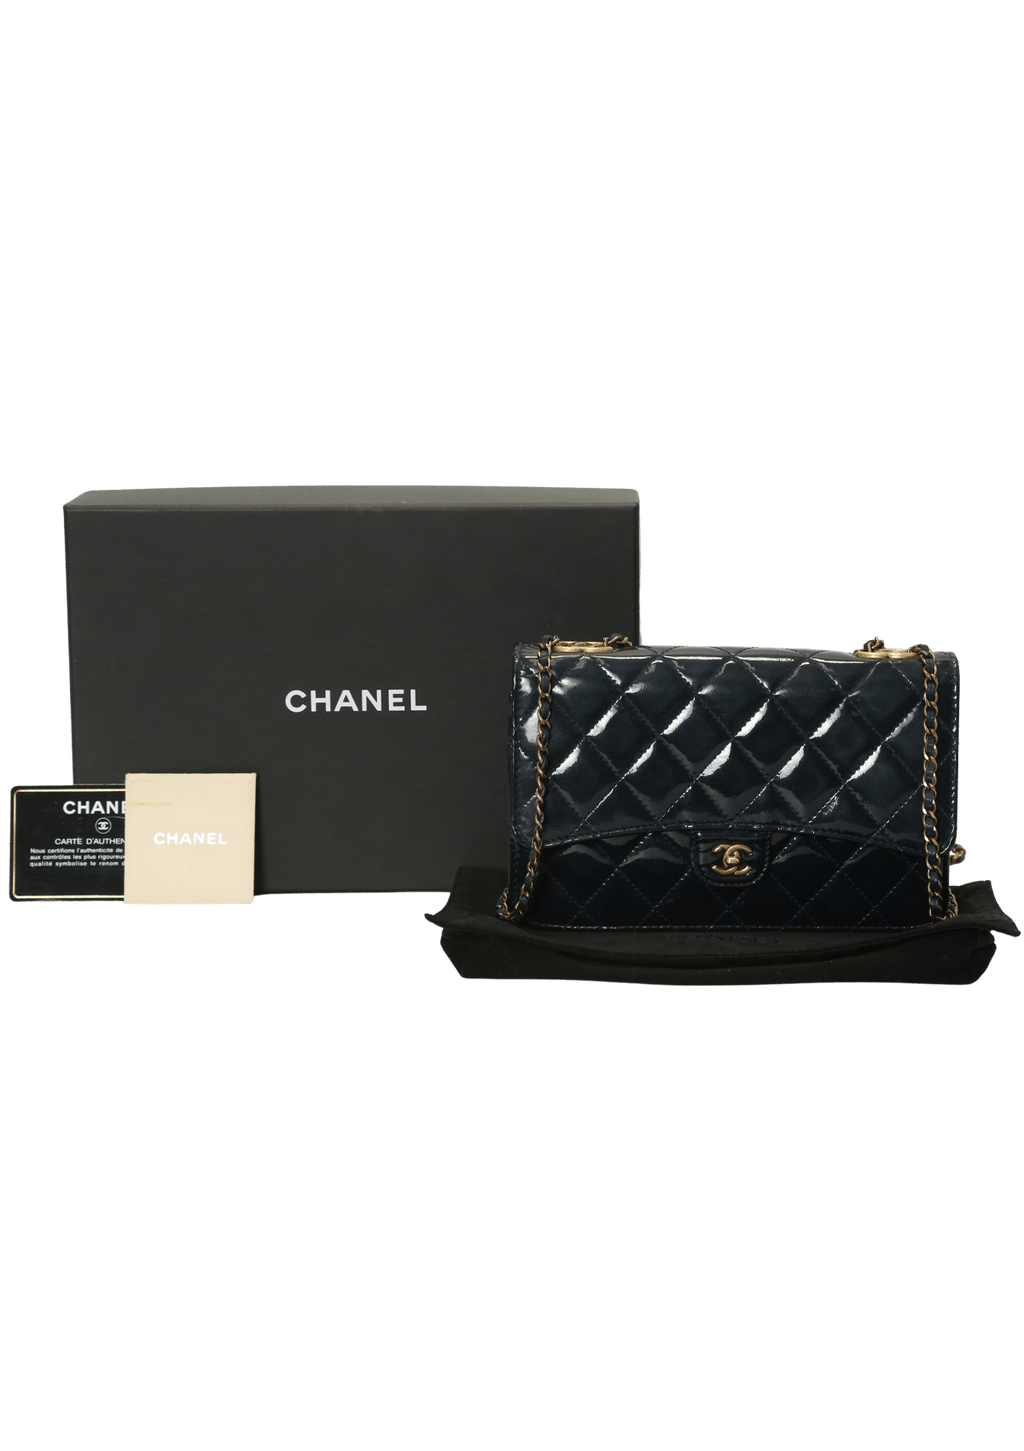 Chanel New Wallet on Chain Royal Woc Blue Patent Leather Cross Body Classic Flap Bag